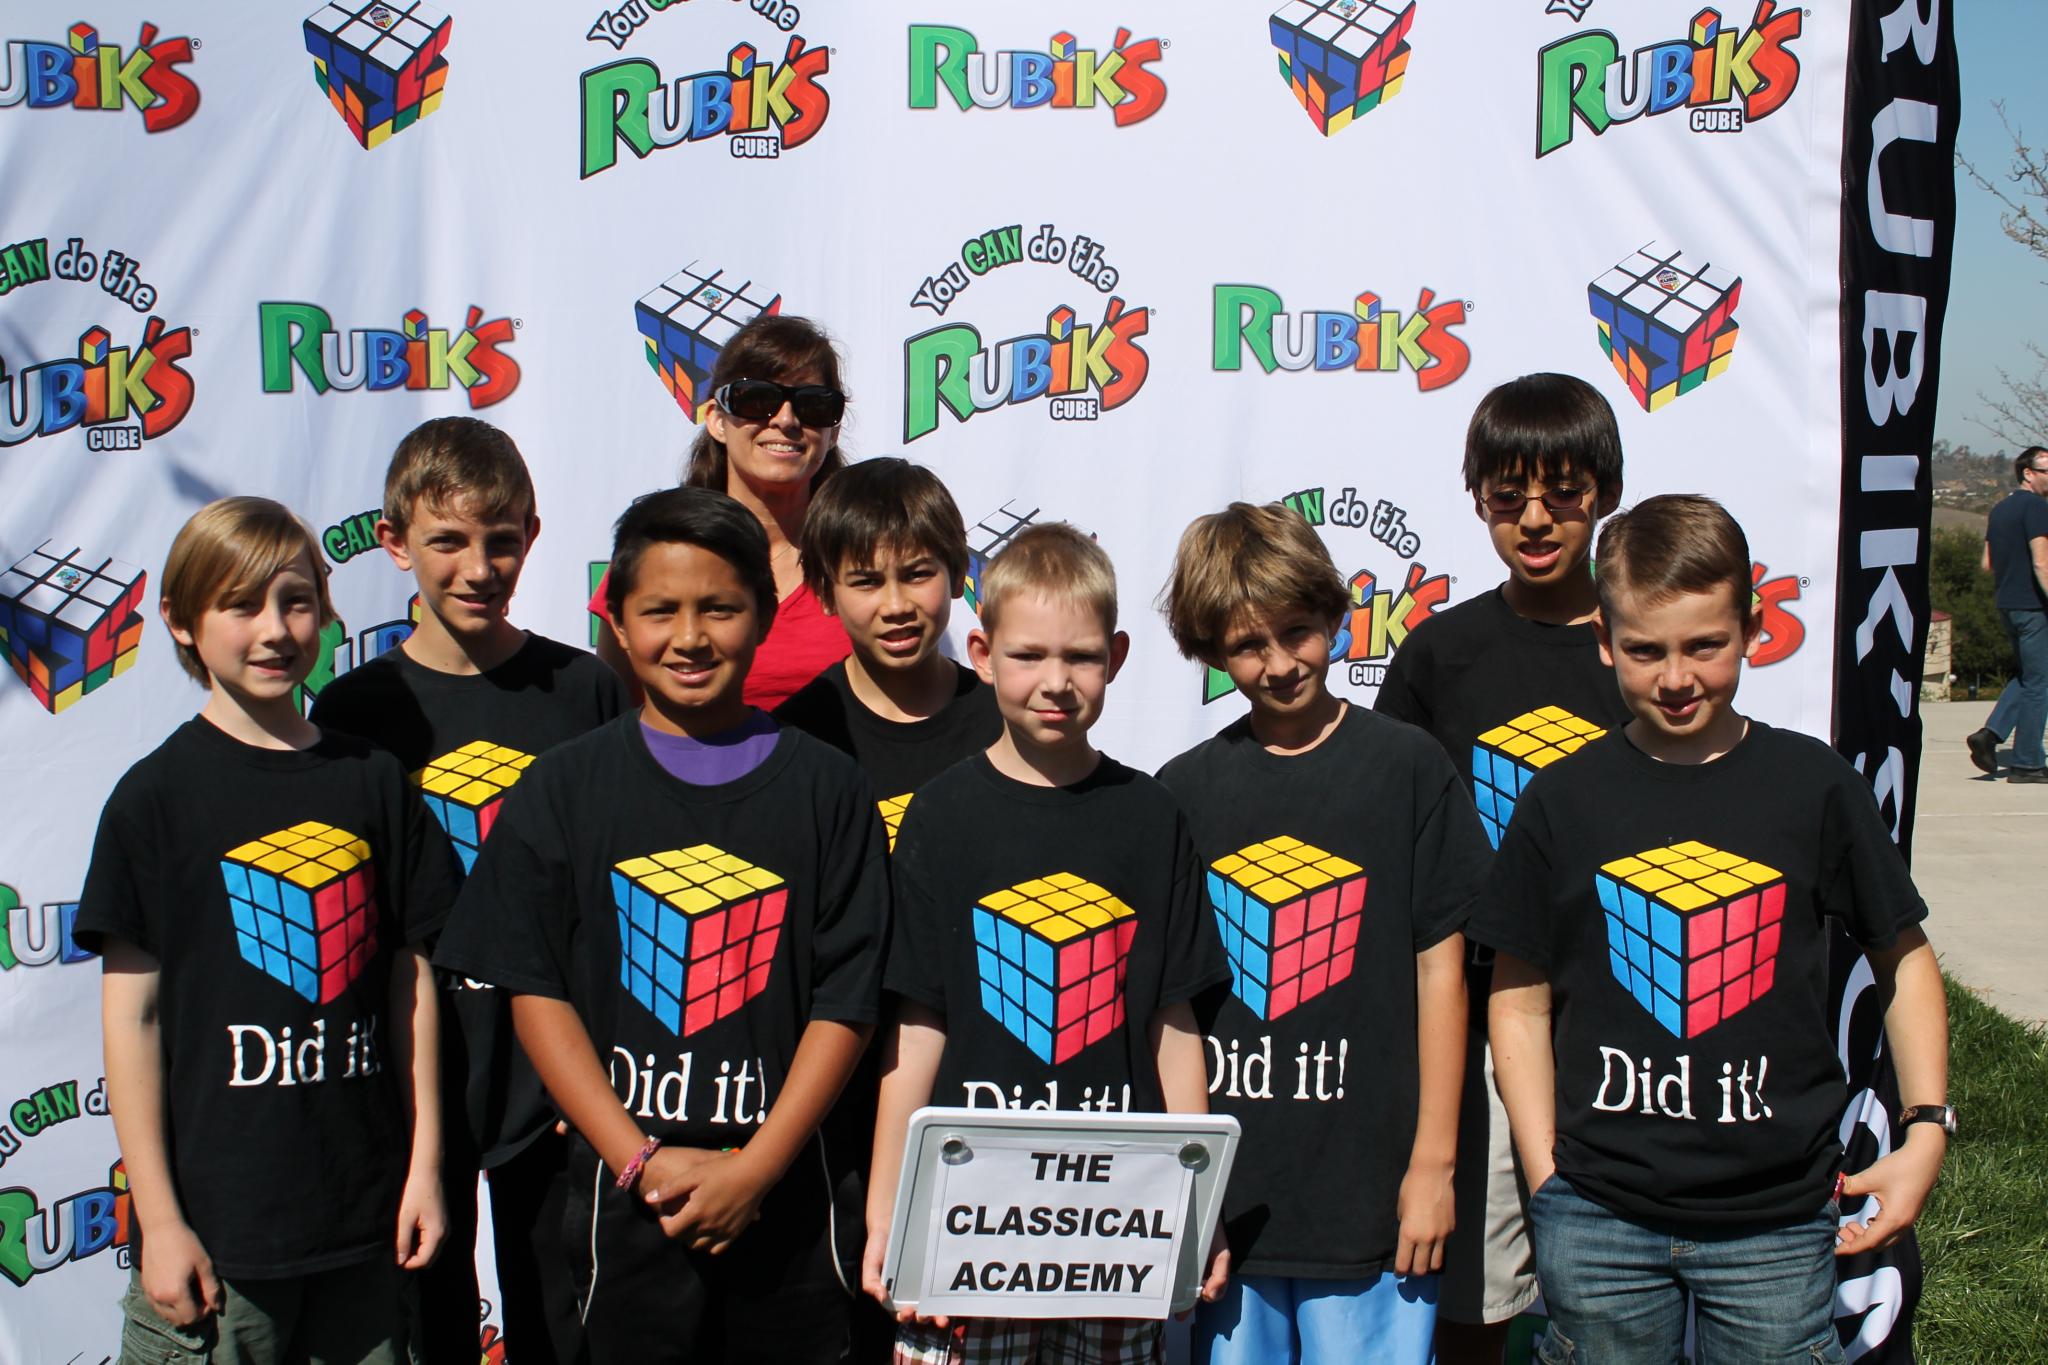 kids with cubing shirts